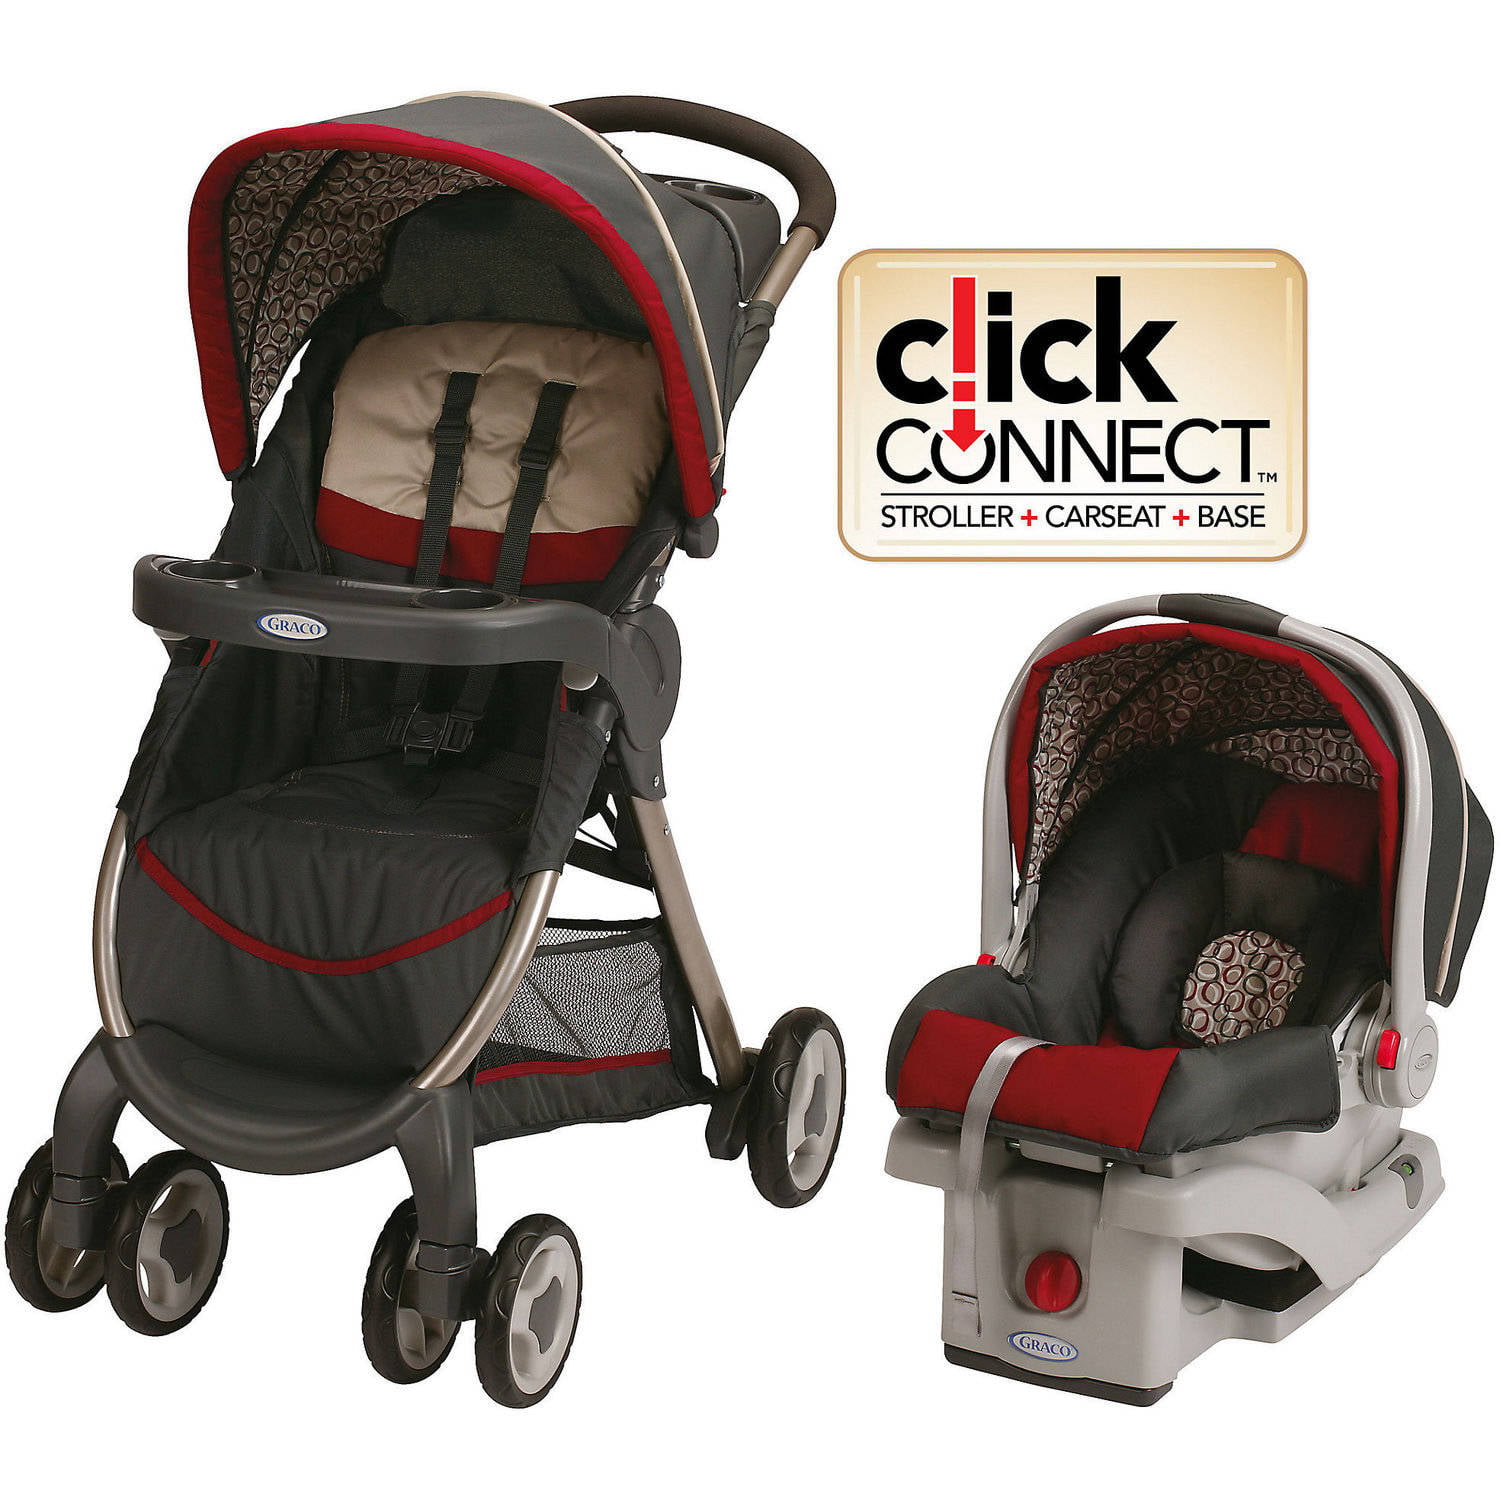 butterfly stroller and carseat